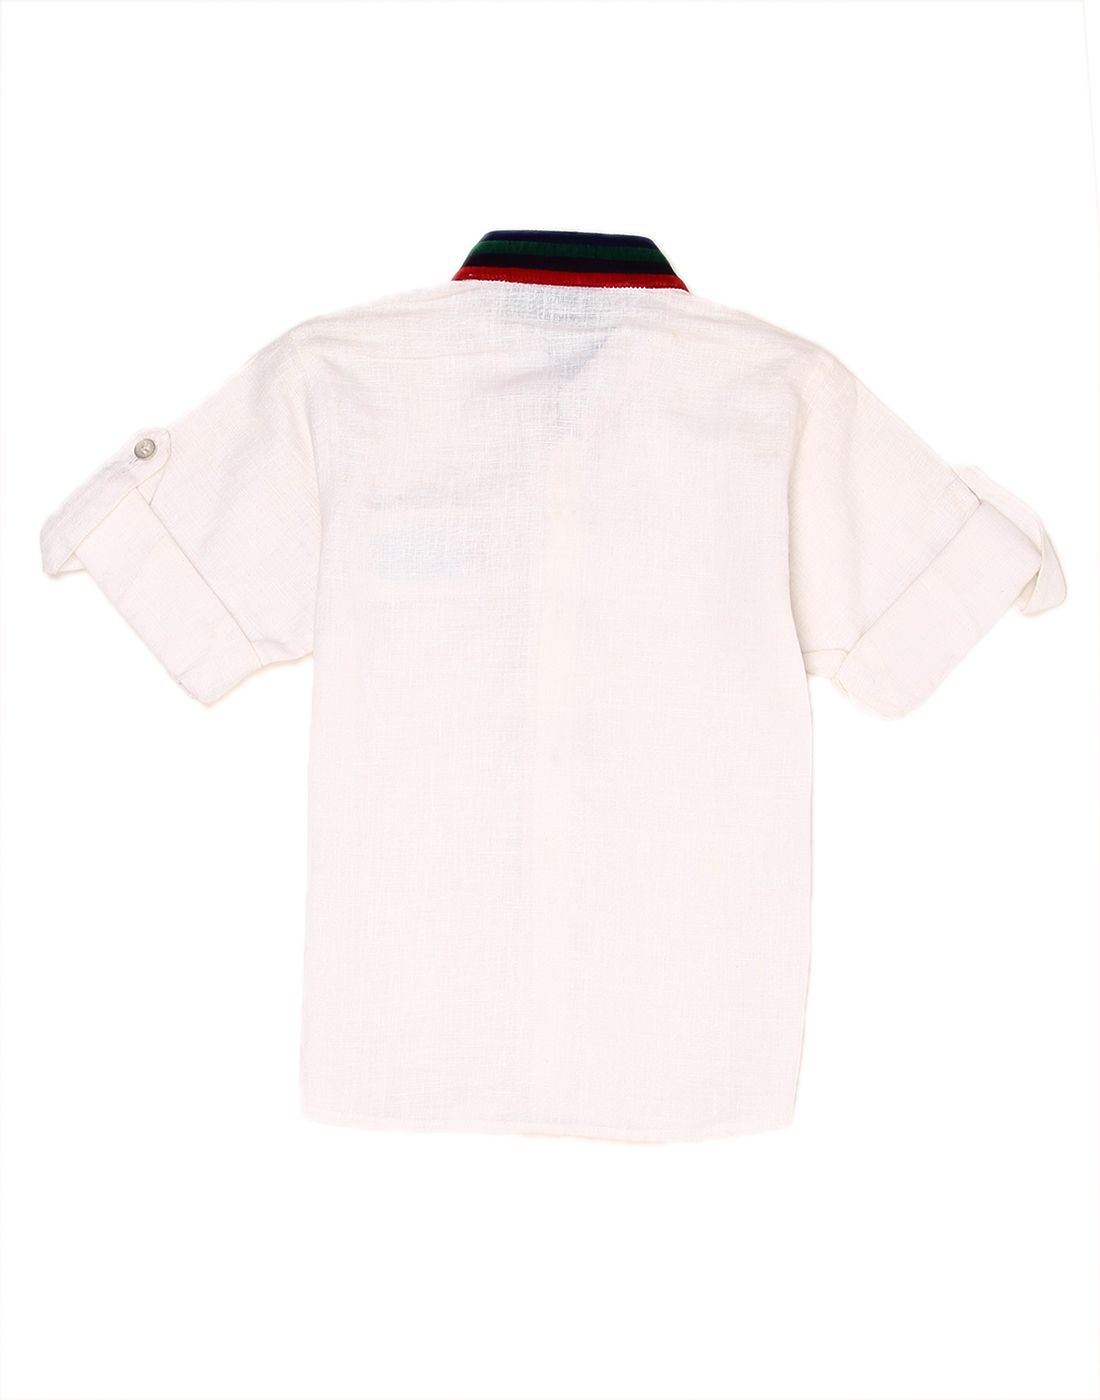 Actuel Infant Casual Wear White Shirt